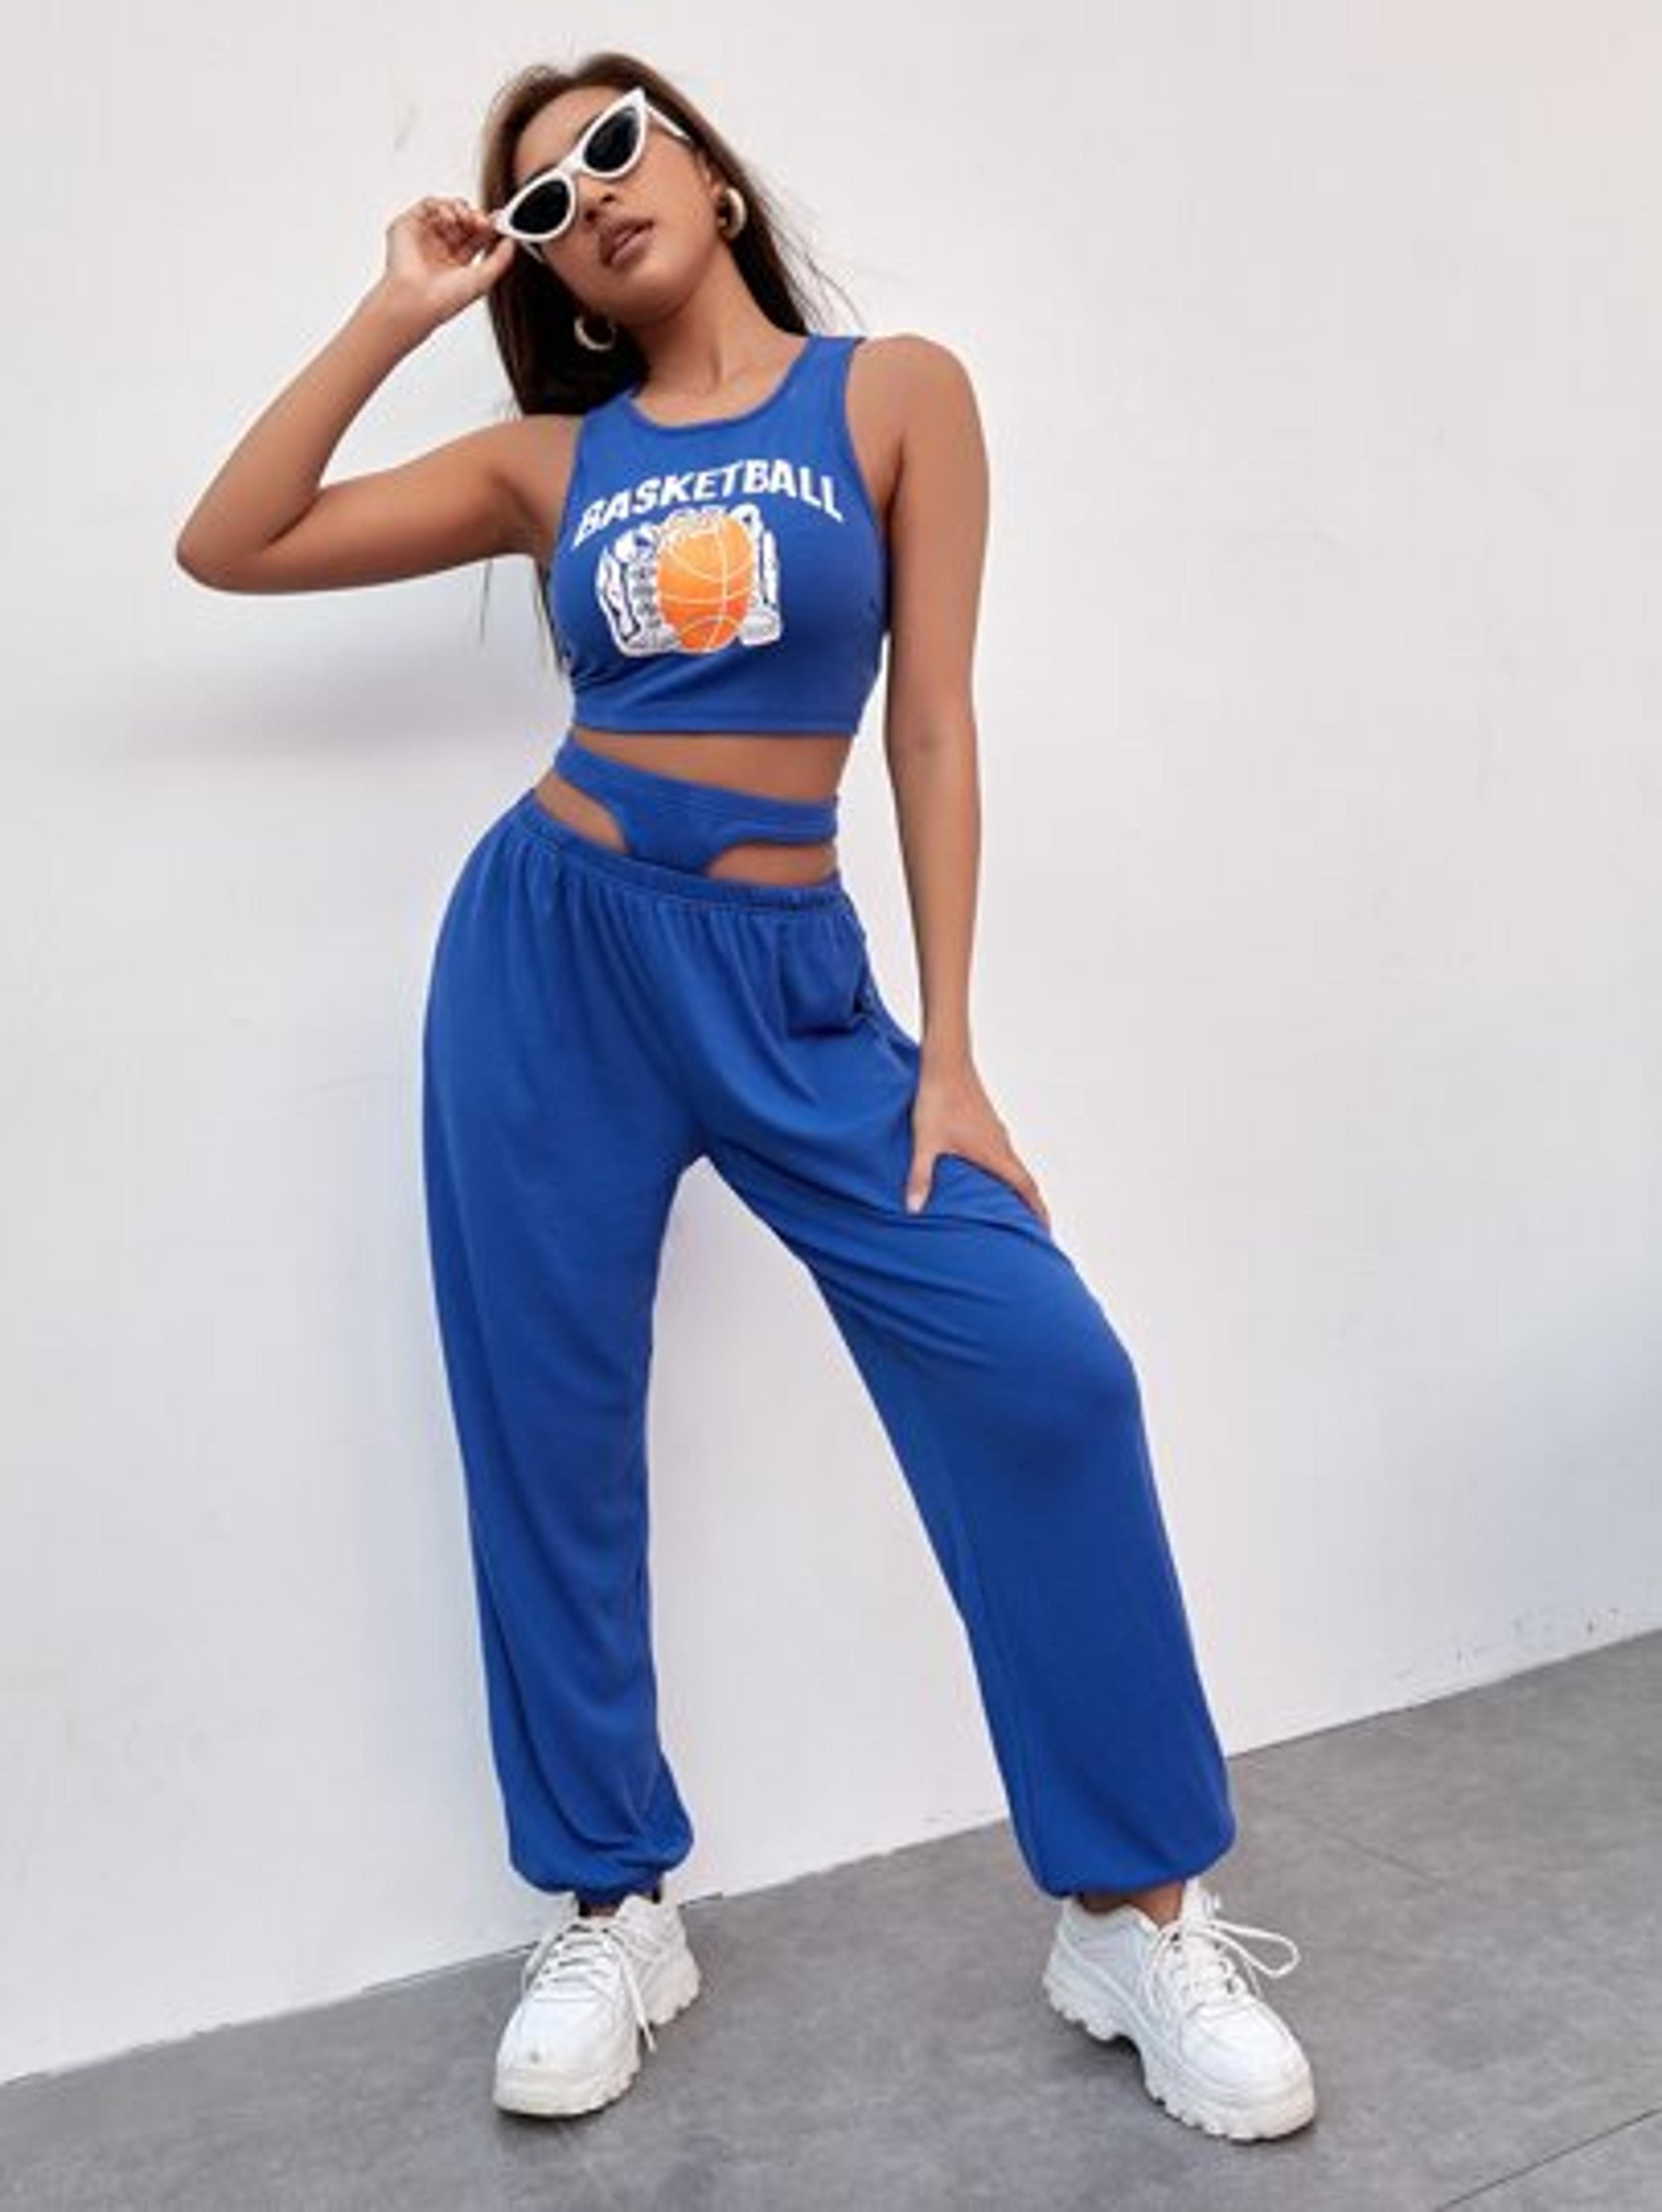 Letter And Basketball Print Crop Tank Top & Cut Out Sweatpants | SHEIN USA